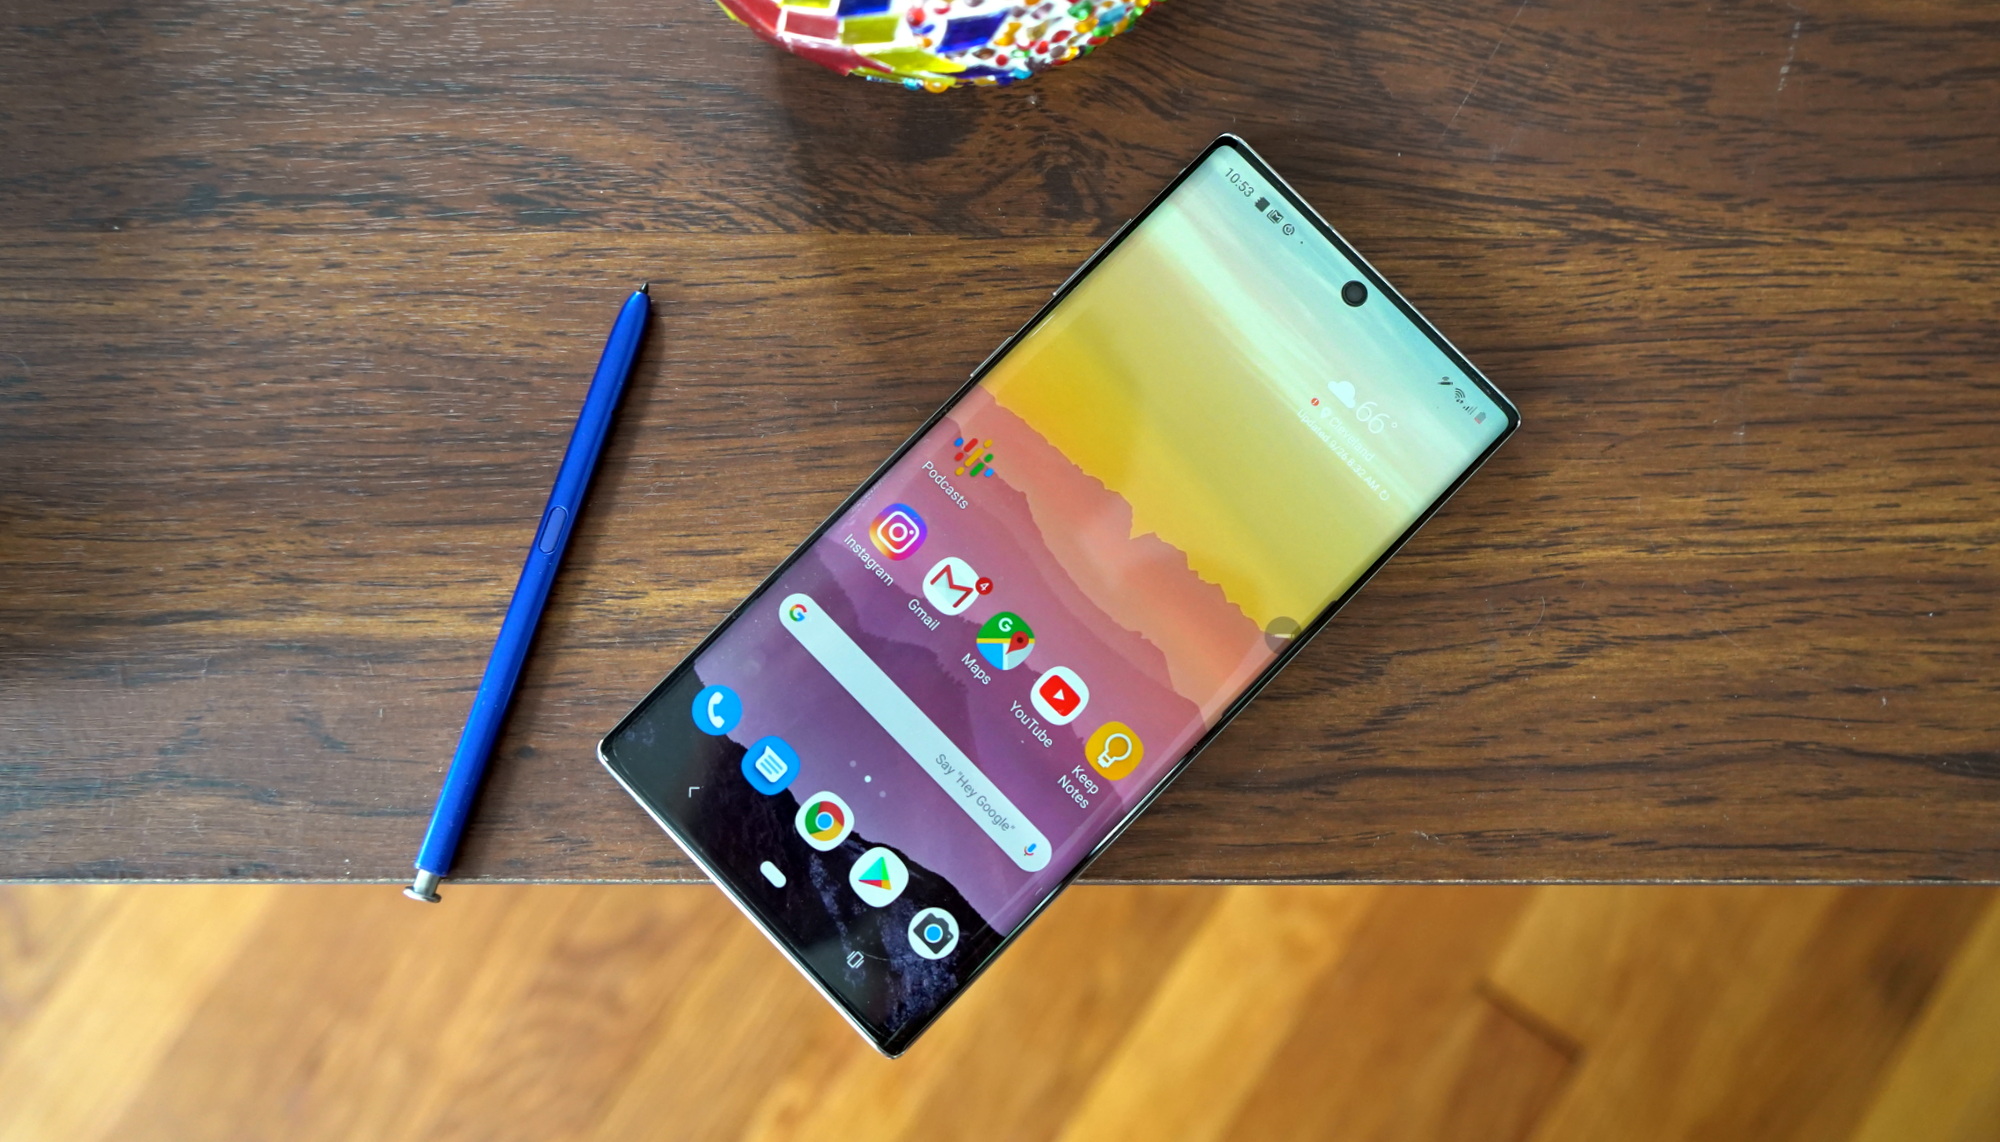 "Sorry, fans, the Galaxy Note is dead": Samsung hints at Galaxy Note series closure